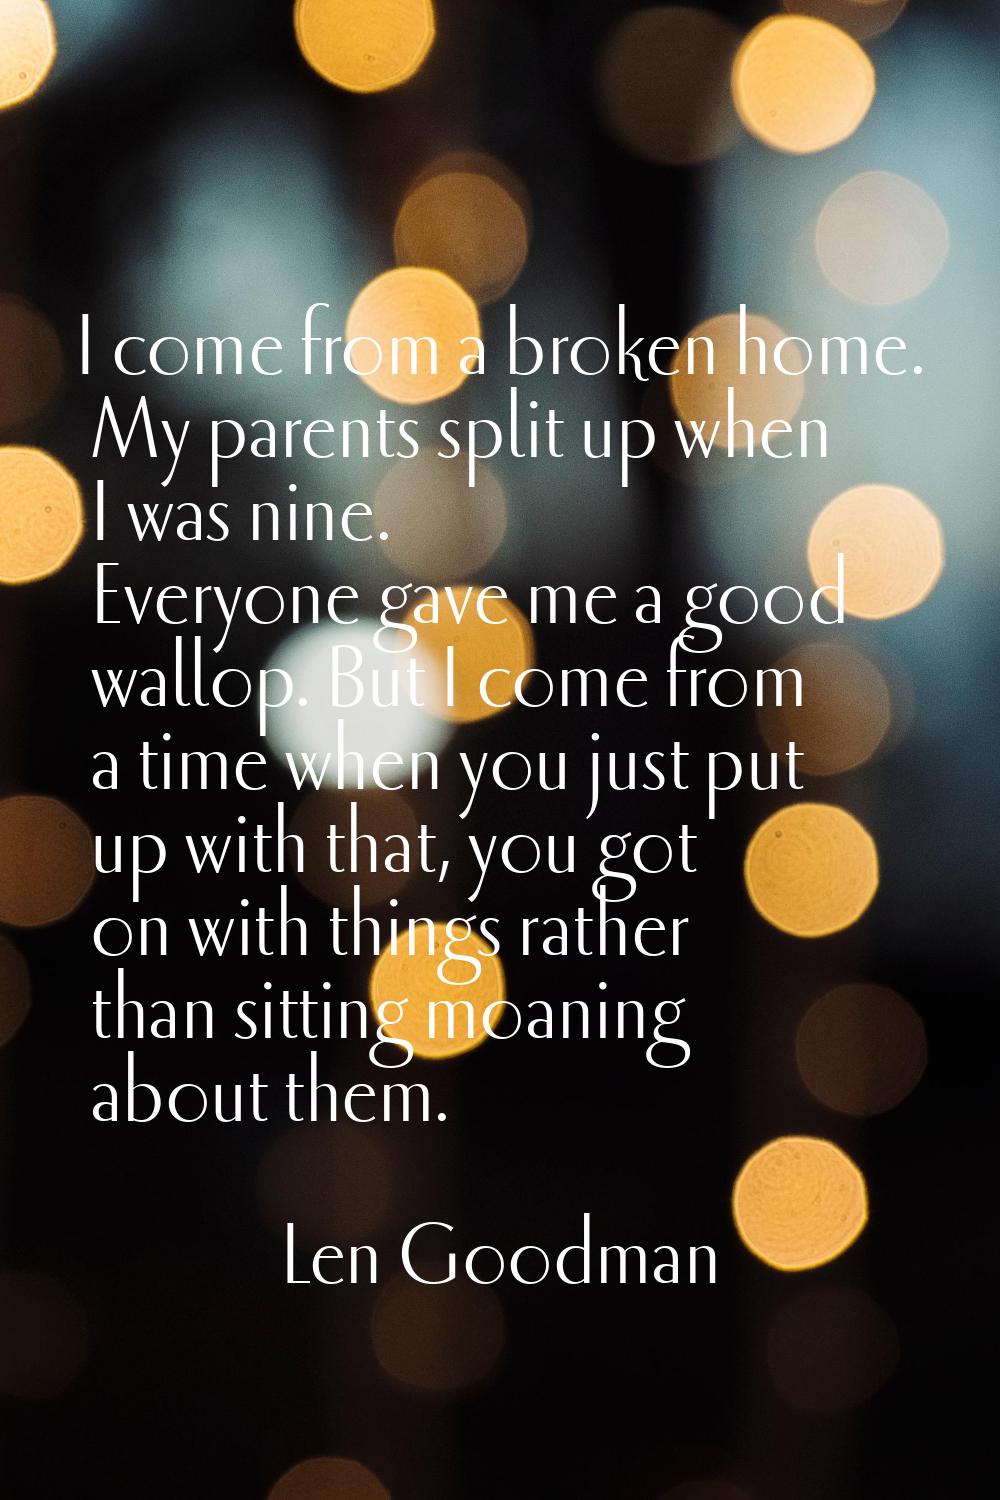 I come from a broken home. My parents split up when I was nine. Everyone gave me a good wallop. But